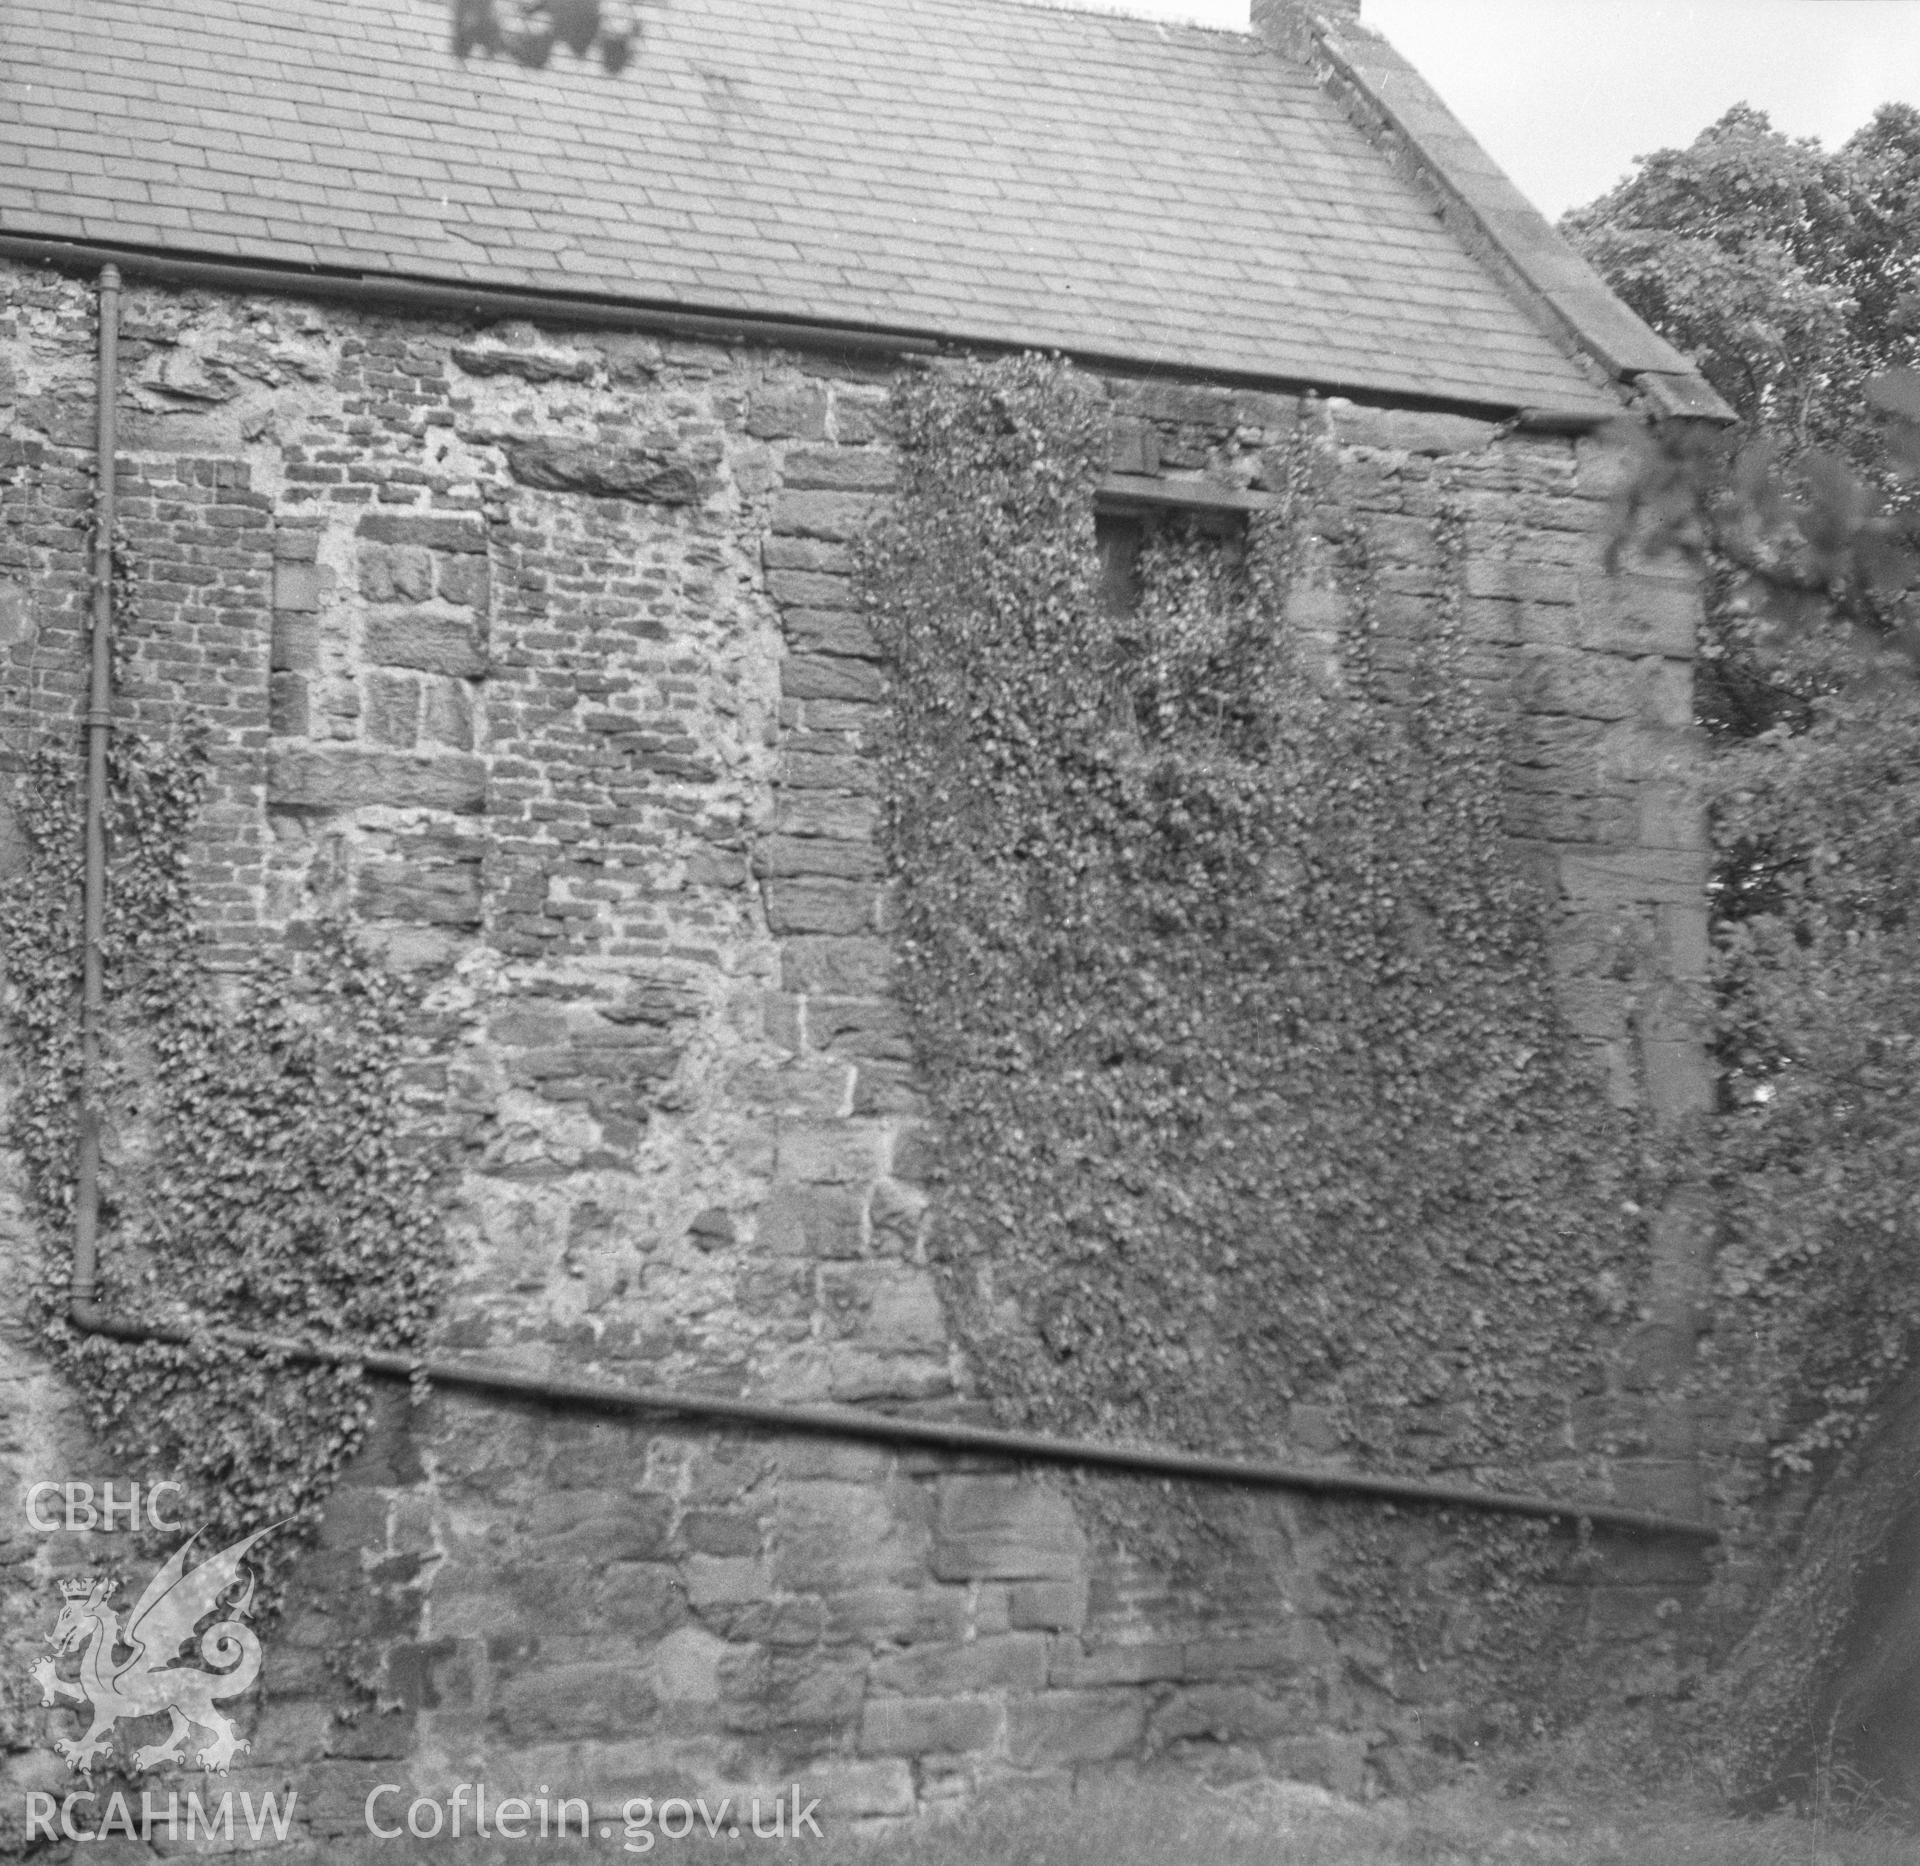 Digital copy of a black and white nitrate negative showing view of blocked window at Llyseurgain, Northop.